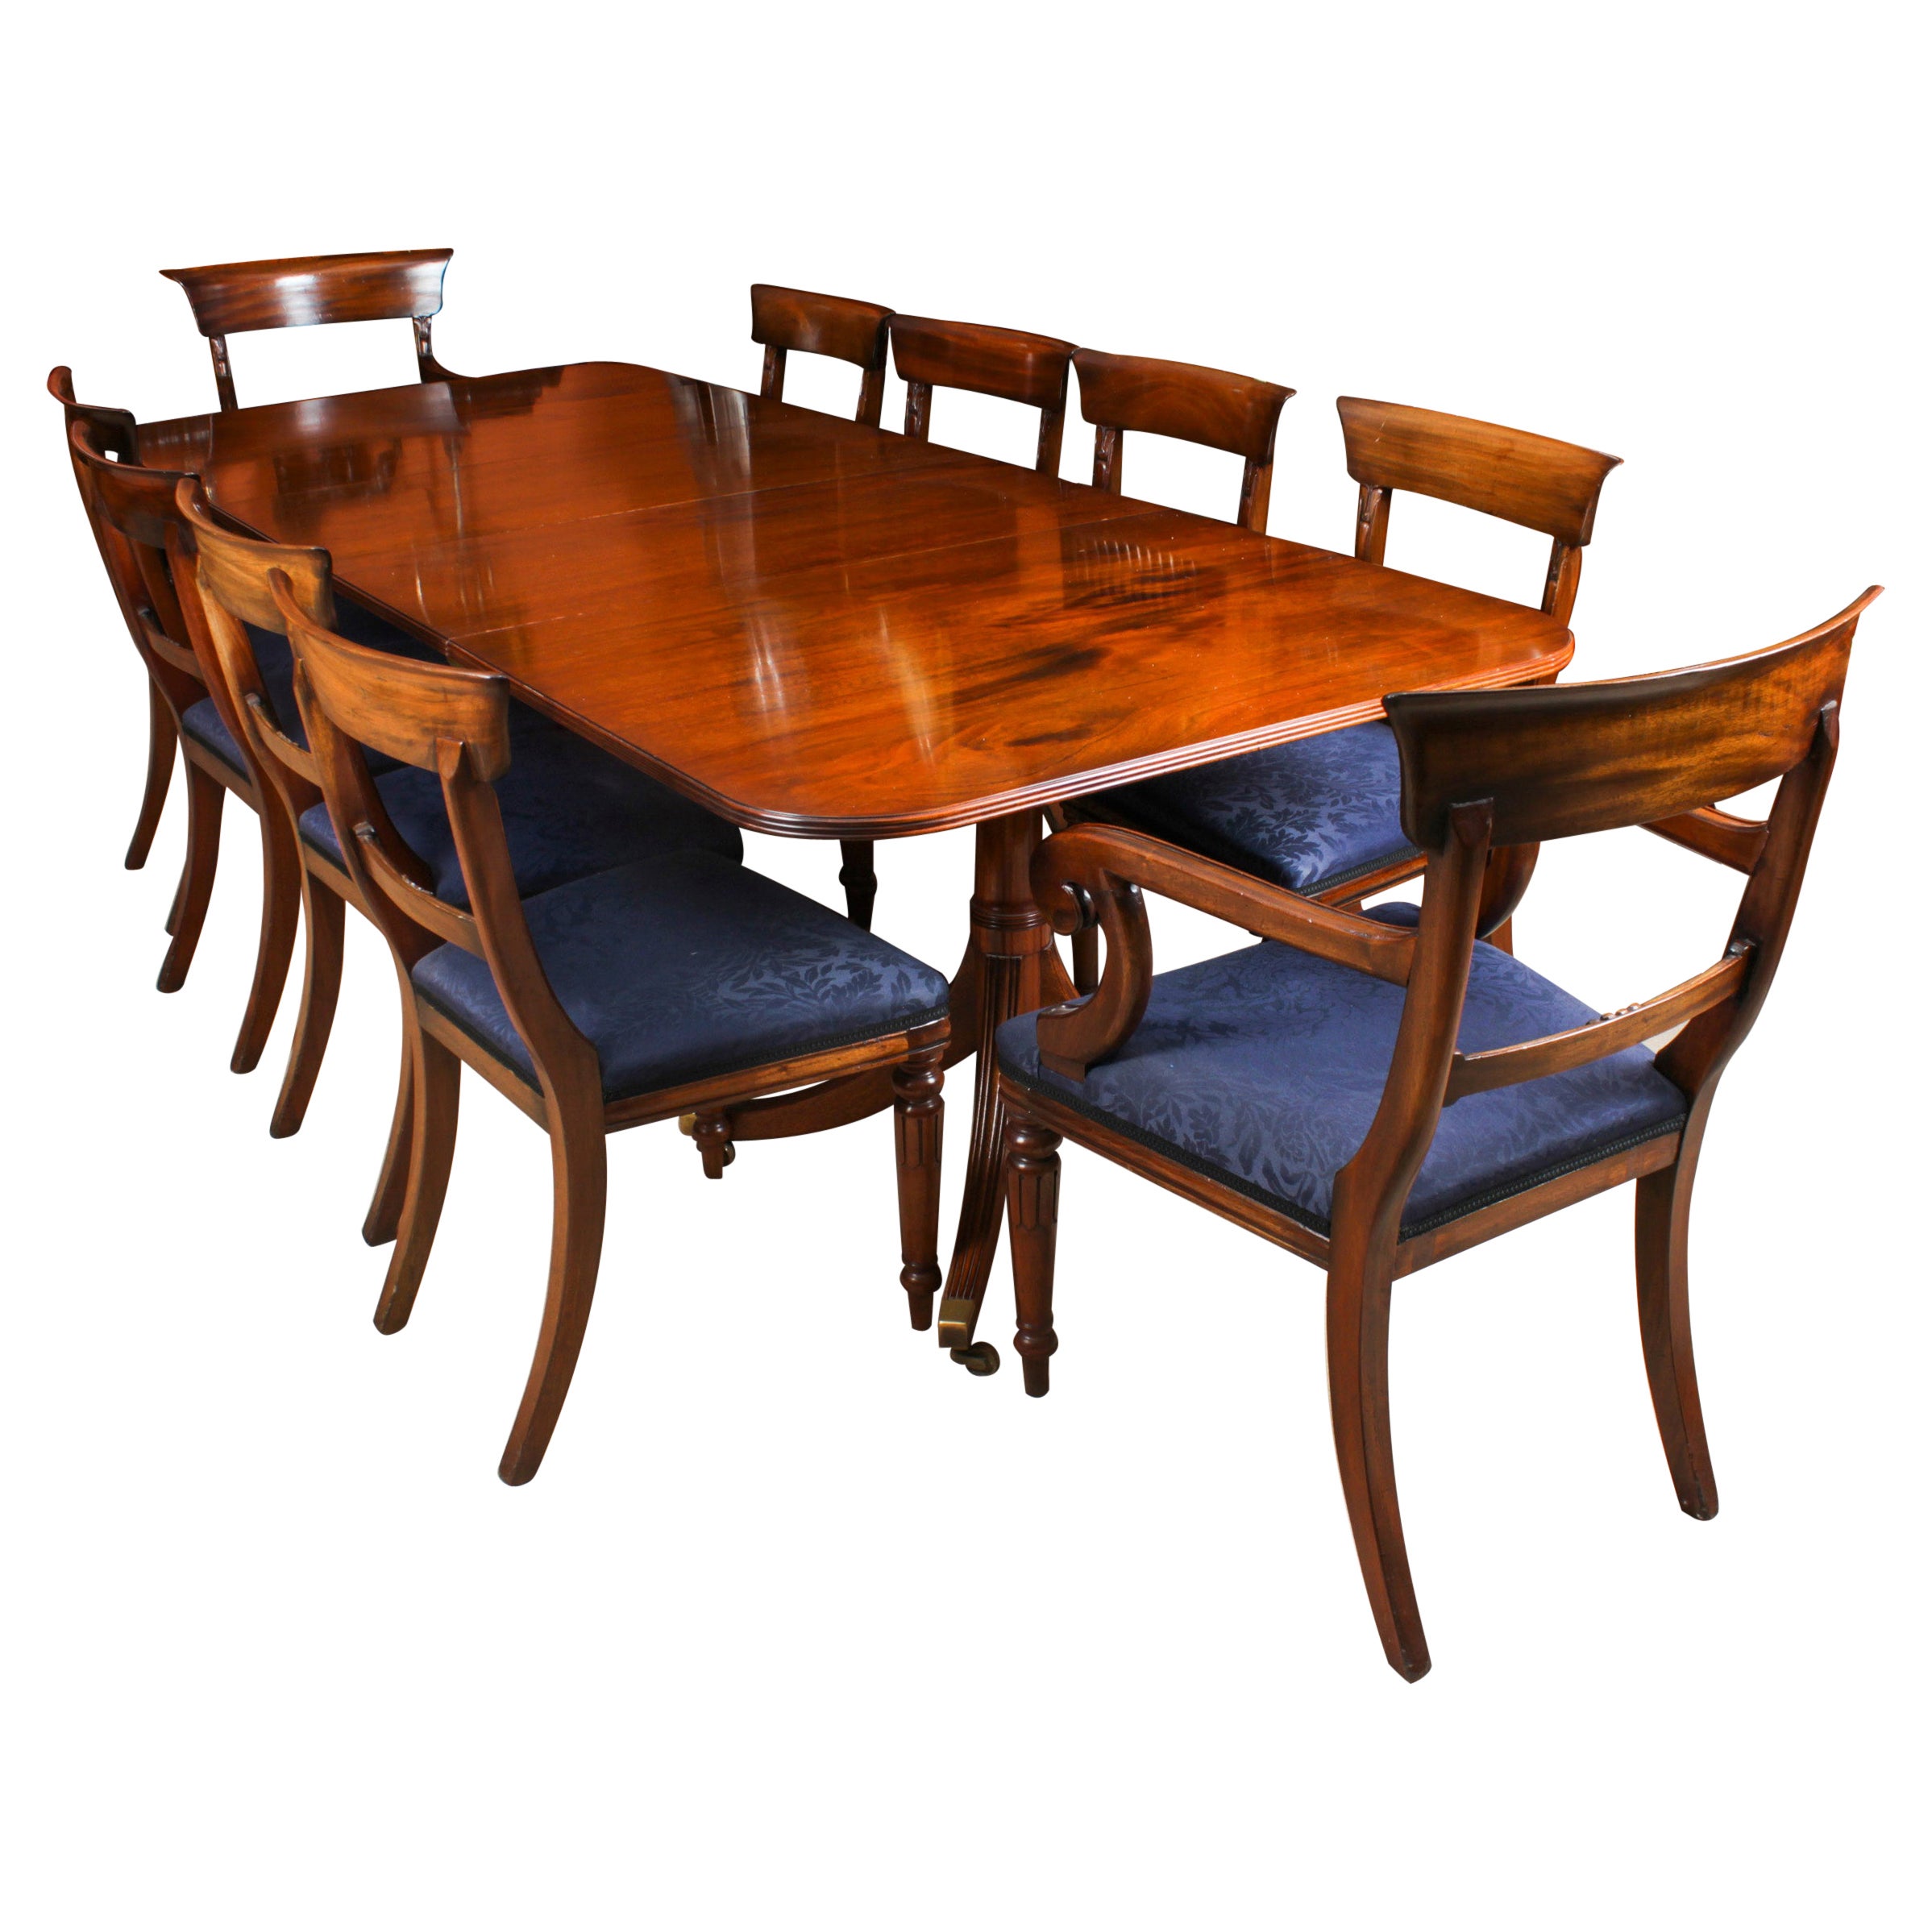 Vintage Twin Pillar Dining Table & 10 Dining Chairs by William Tillman 20th C